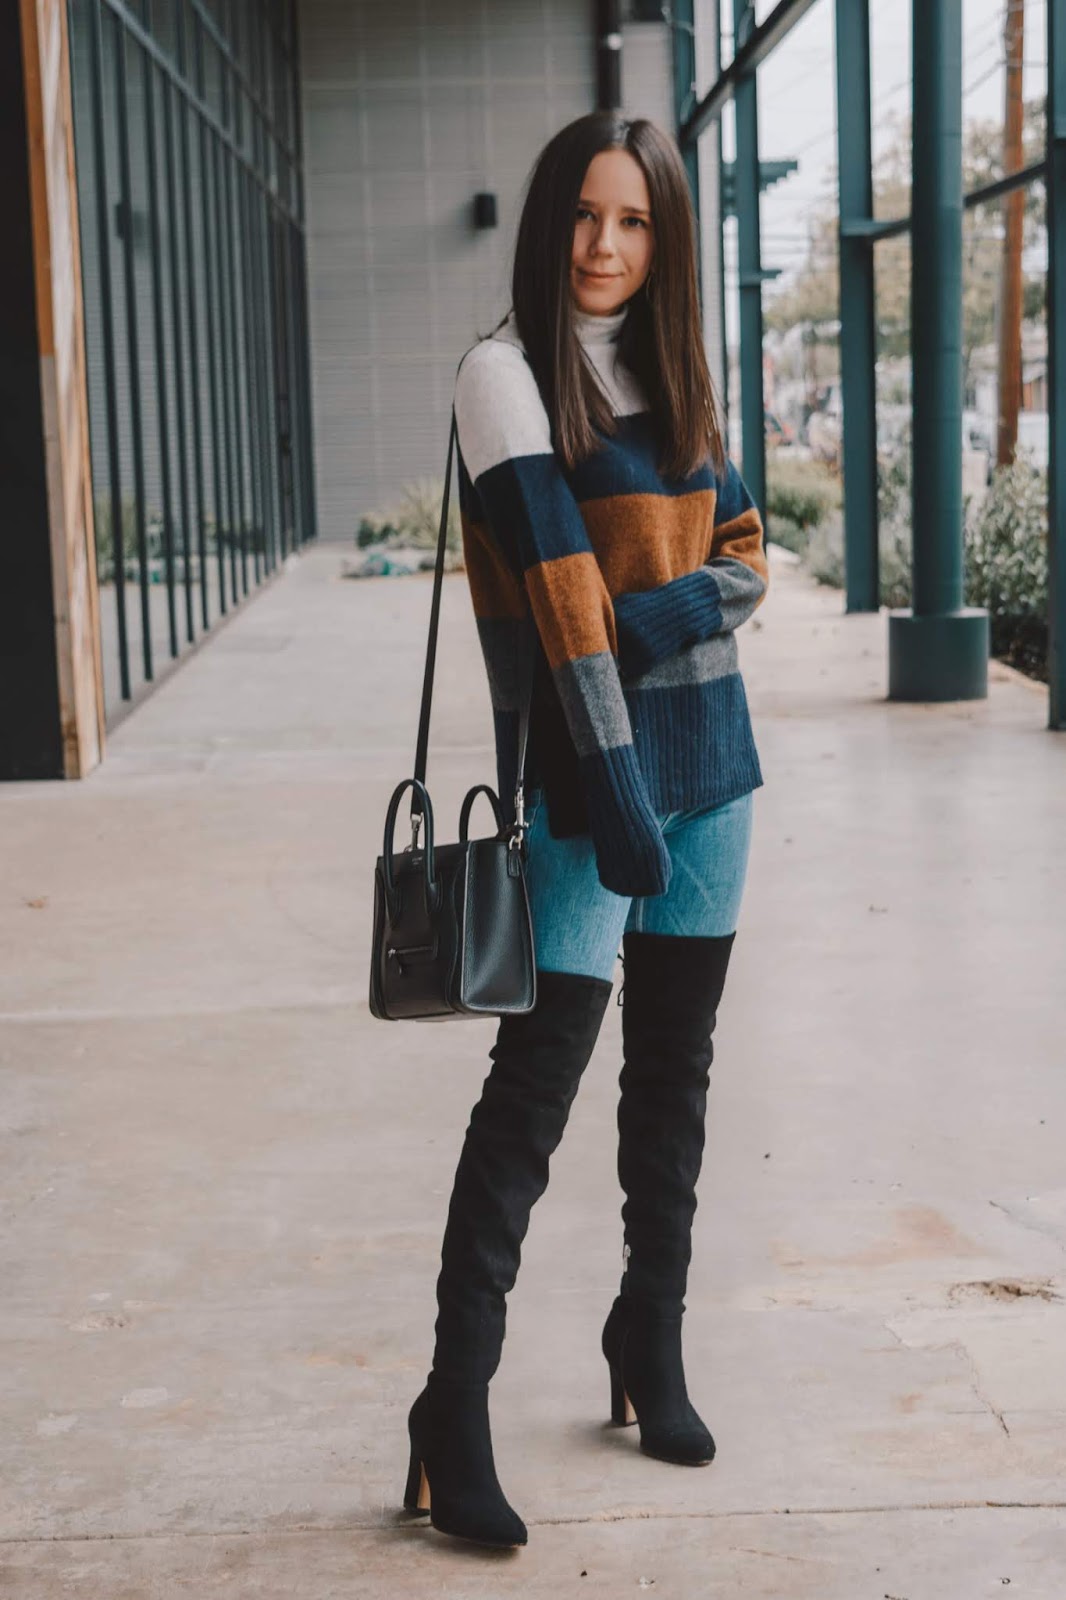 Cozy winter outfit